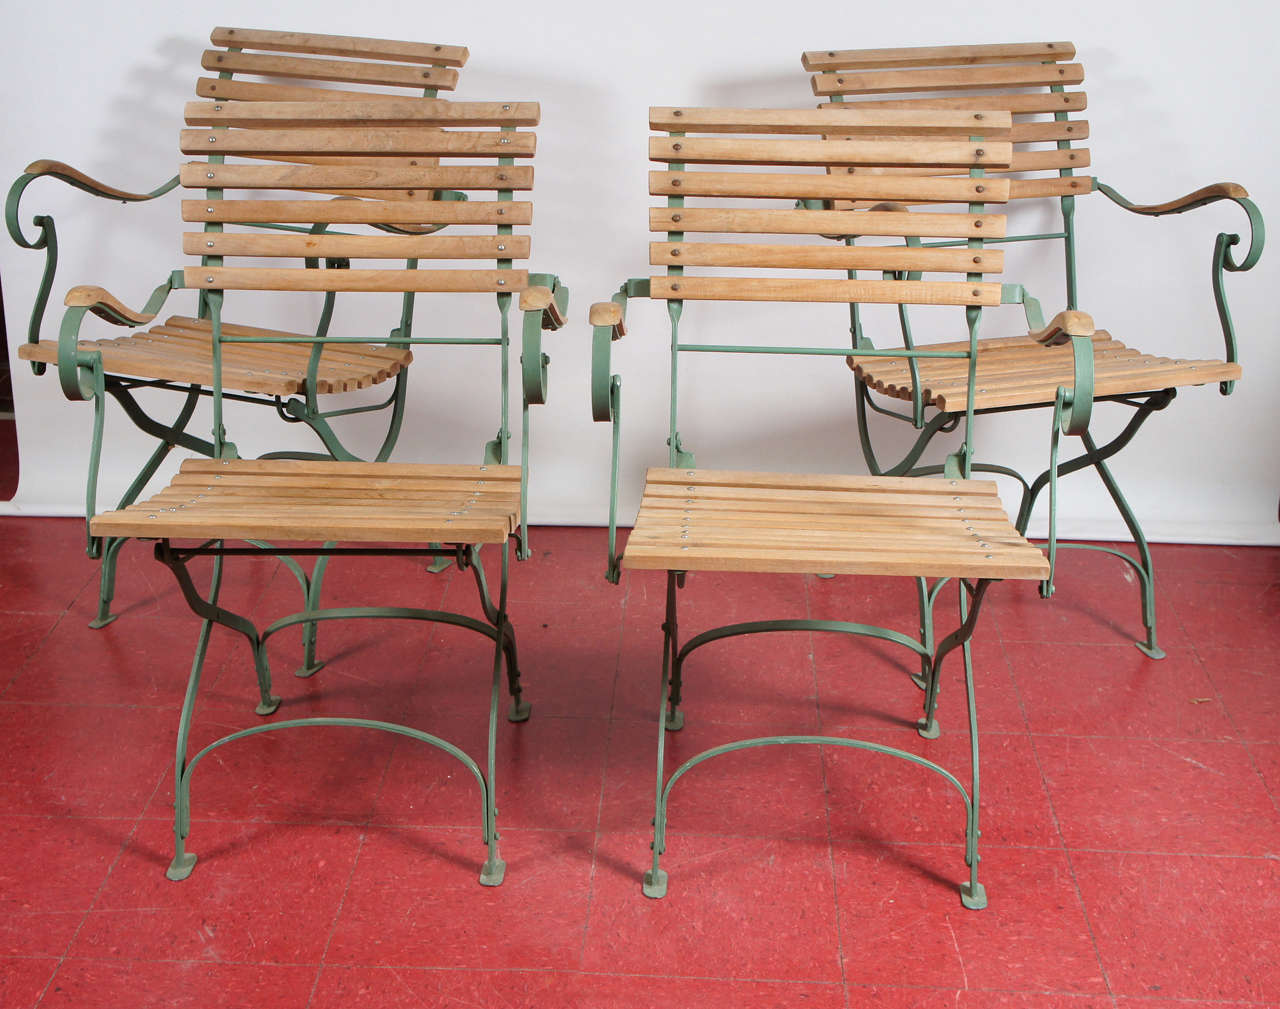 French bistro style folding teak and metal arm chairs made for indoor or outdoor use, excellent solid condition.
Arm height: 28.75